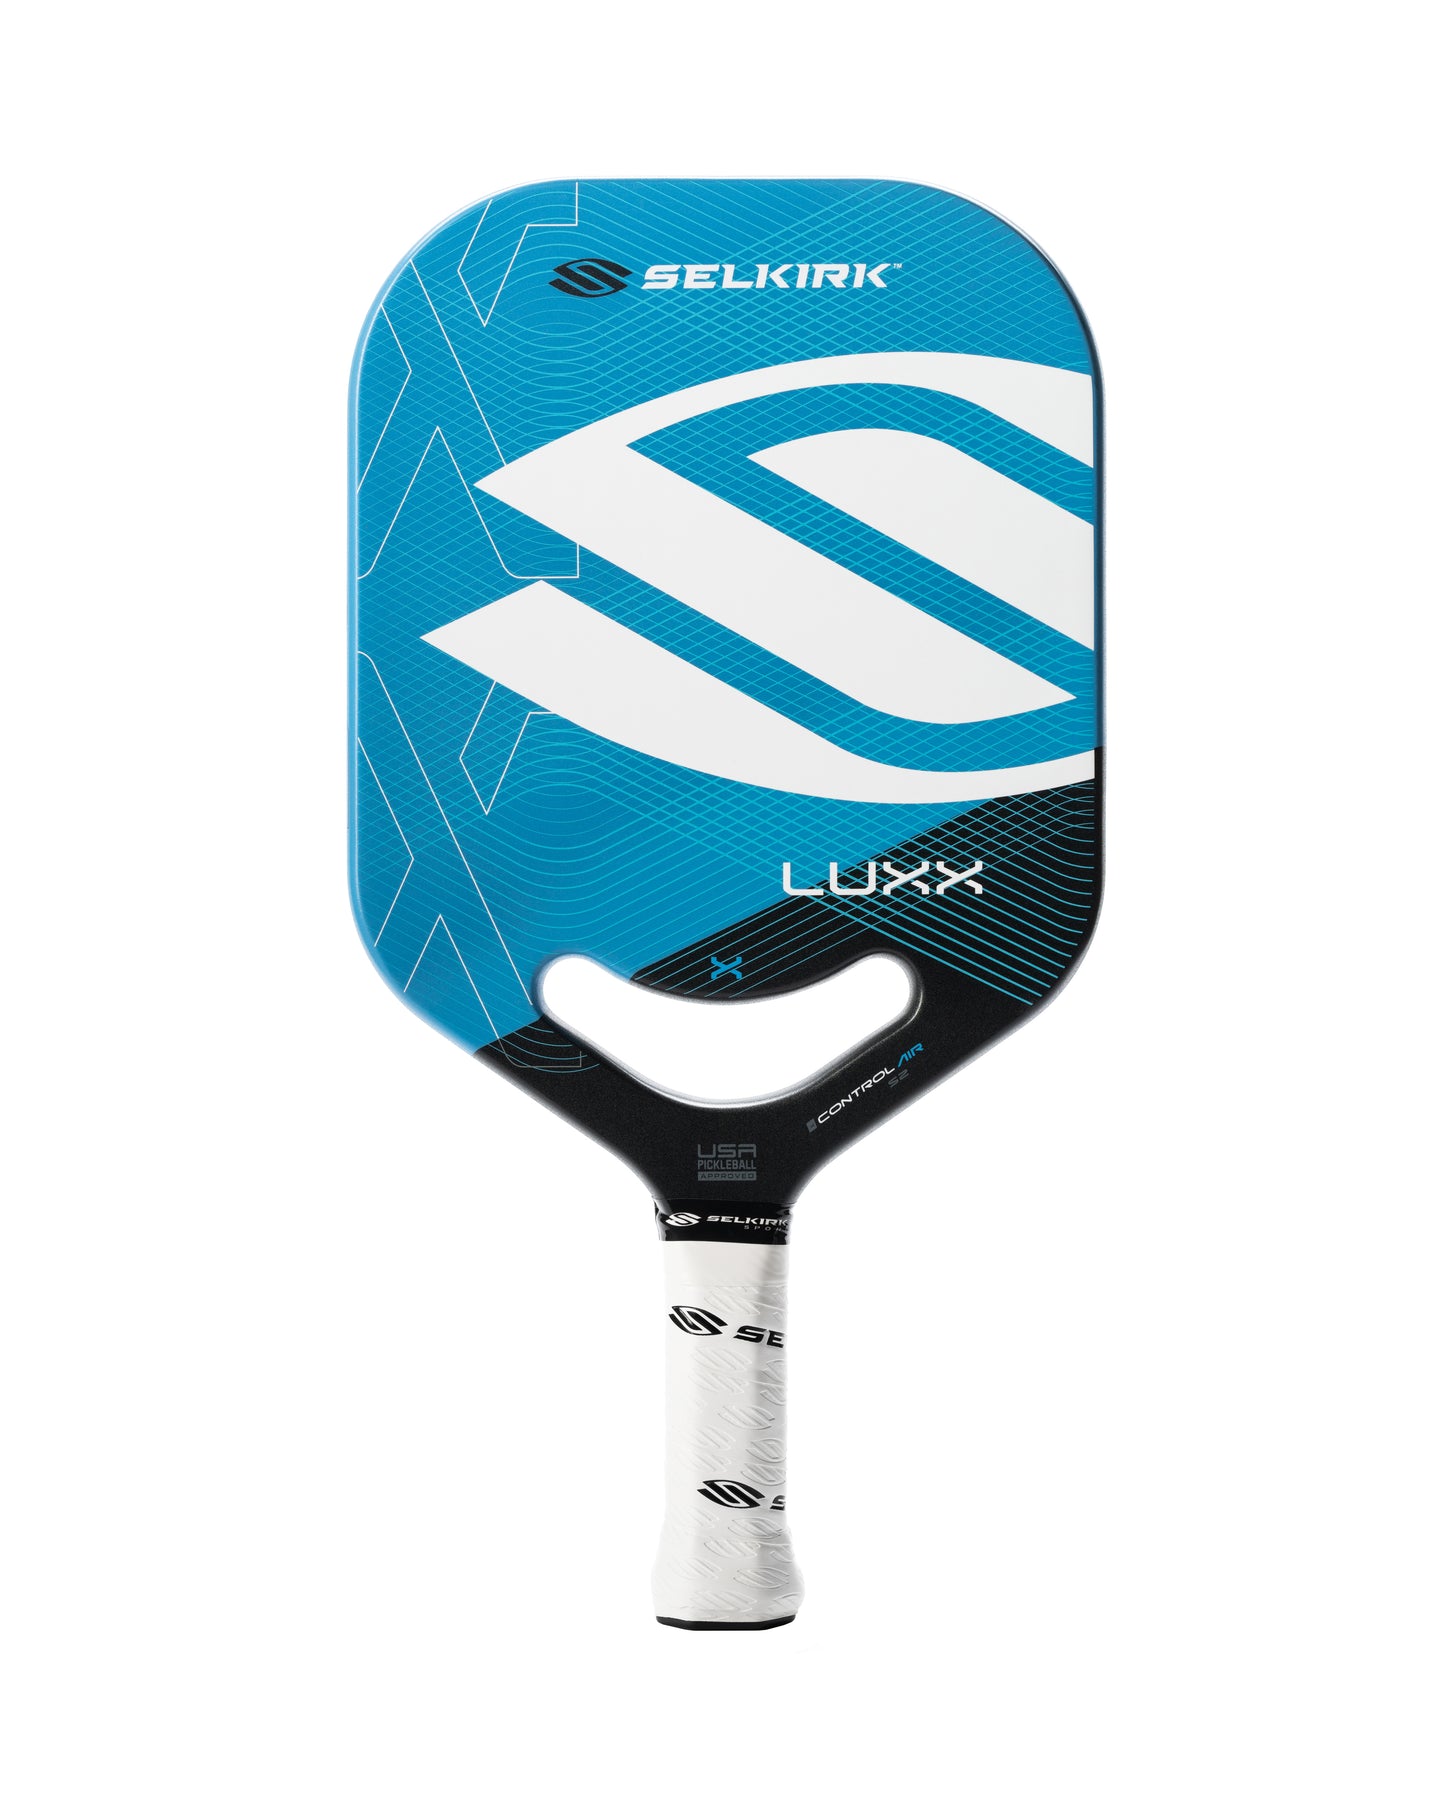 Selkirk sells Selkirk LUXX Control Air S2 Pickleball Paddle with a blue and white design for pickleball players.